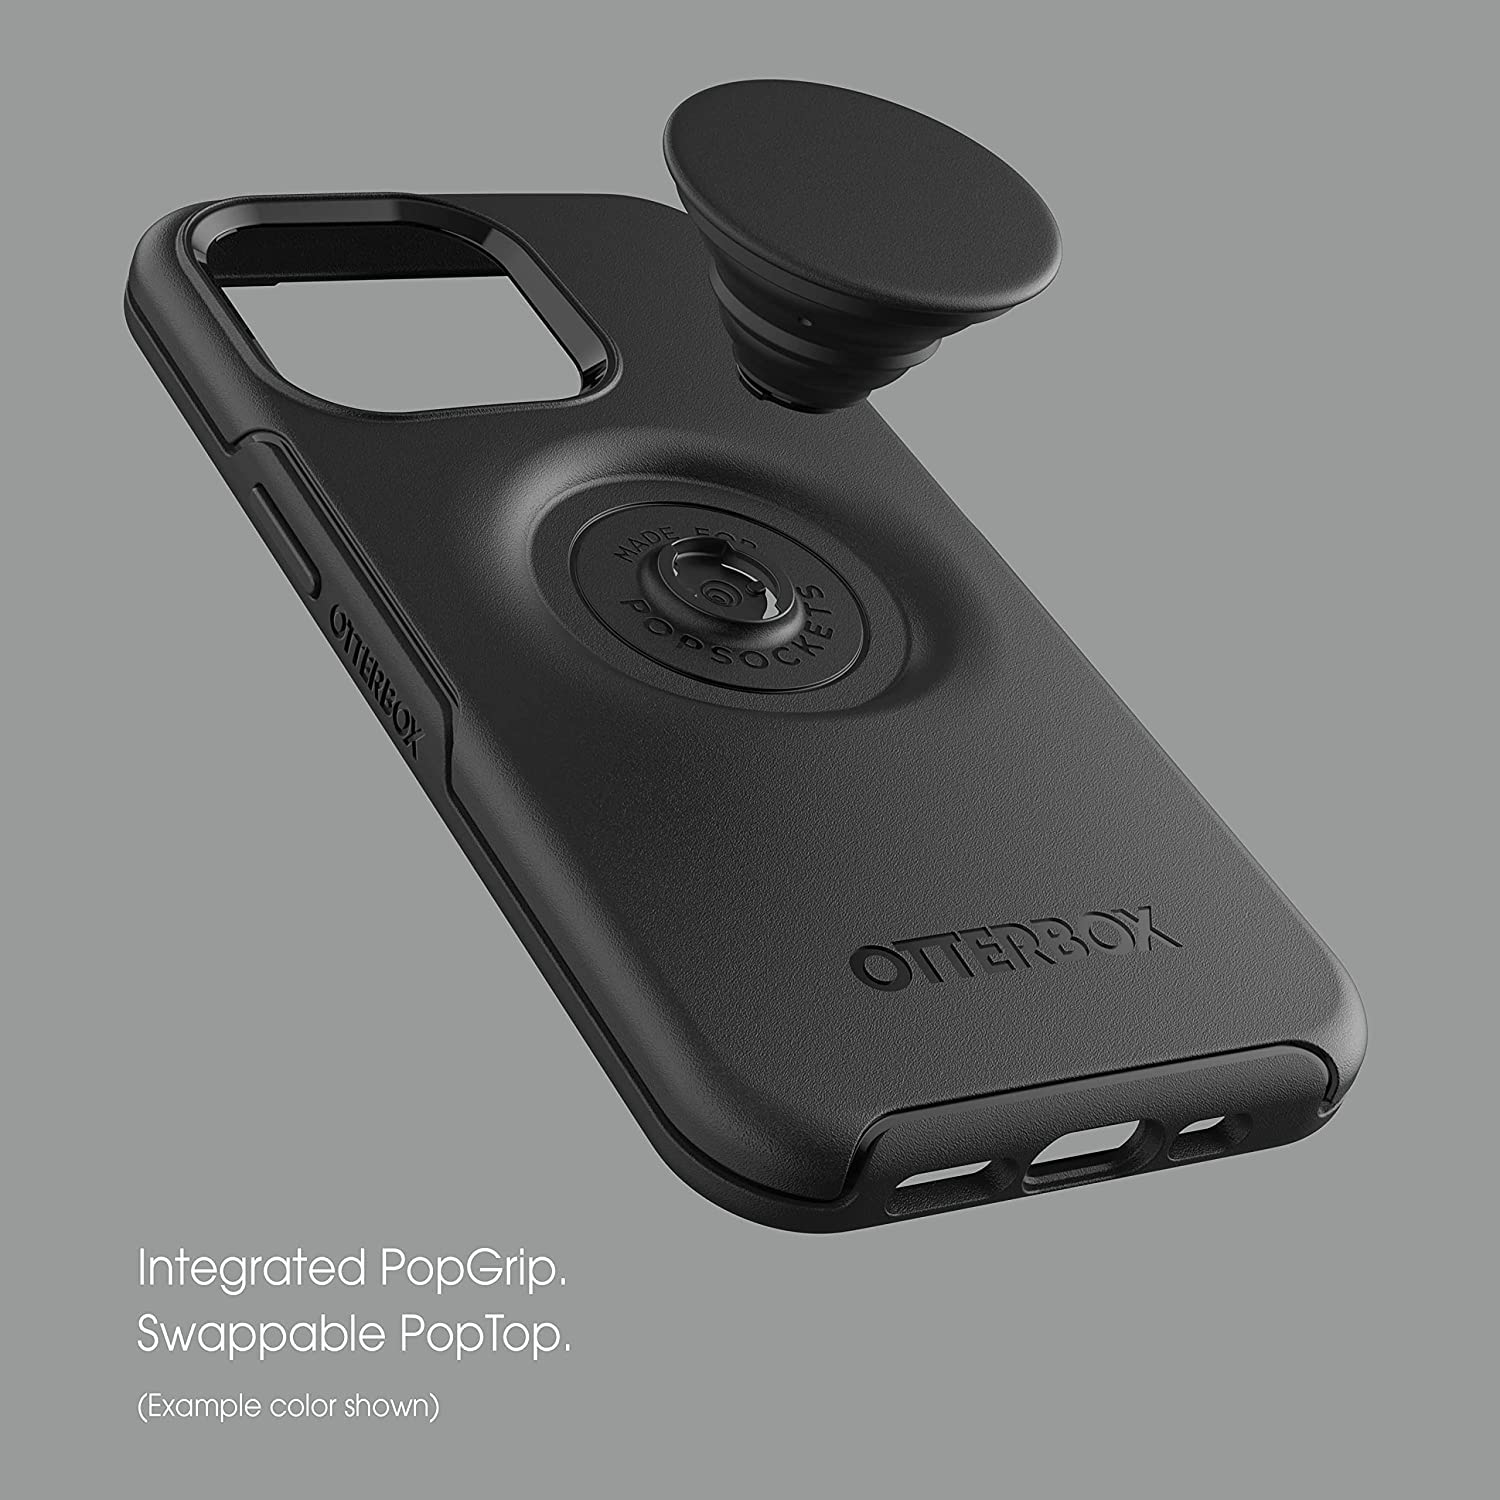 OtterBox + Pop Symmetry Series Case for iPhone 13 Pro (Only) - Non-Retail Packaging - Tranquil Waters (Light Teal/Grey)